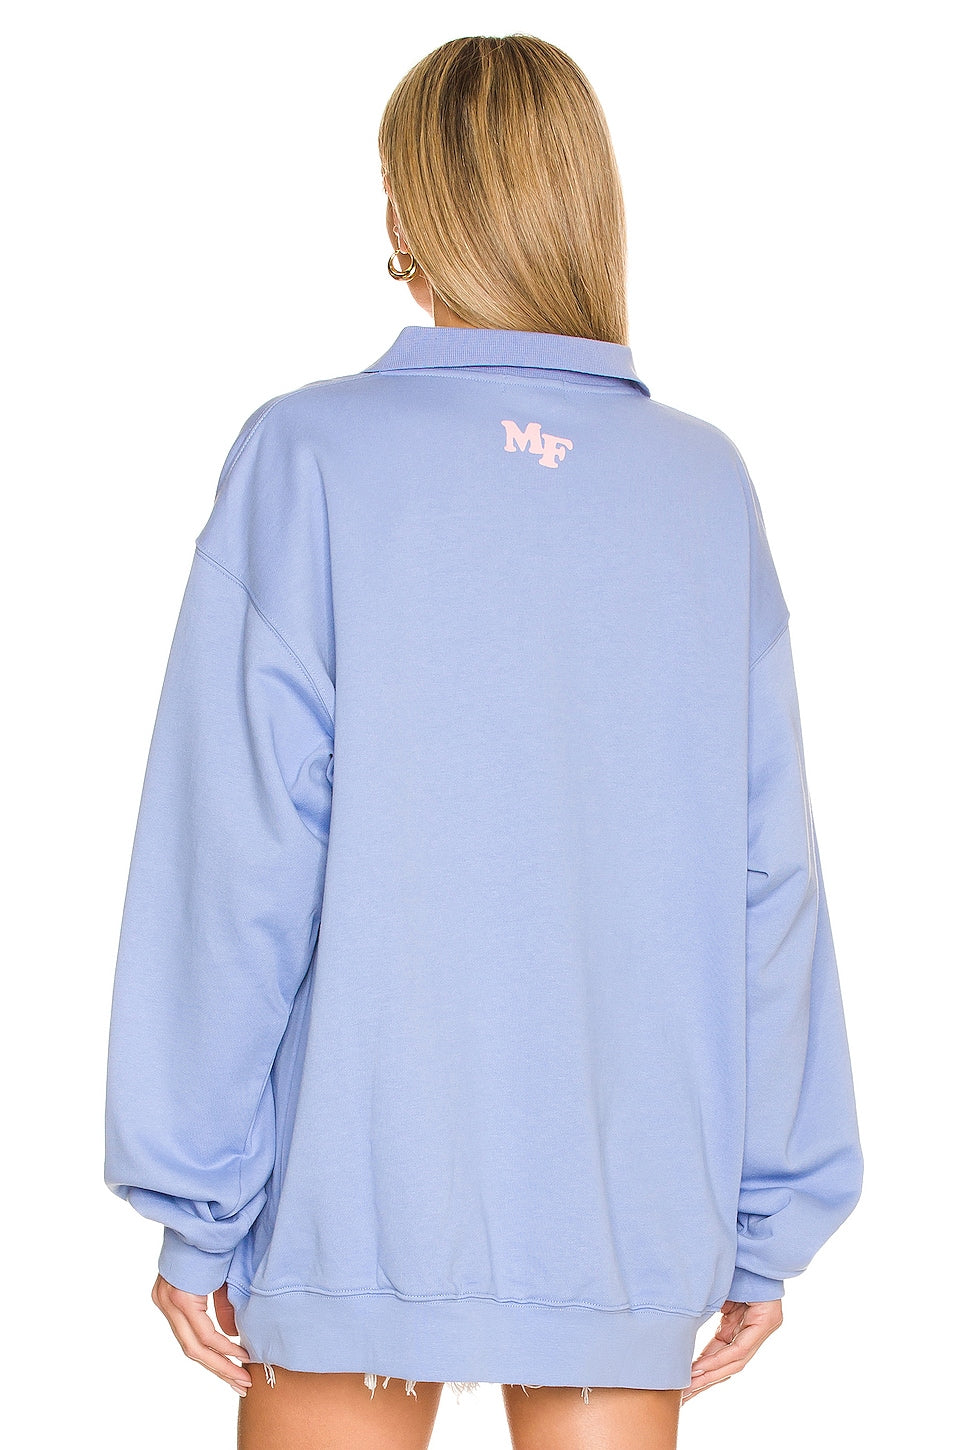 THE MAYFAIR GROUP Be Nice Collared Sweatshirt In Blue SIZE S/M